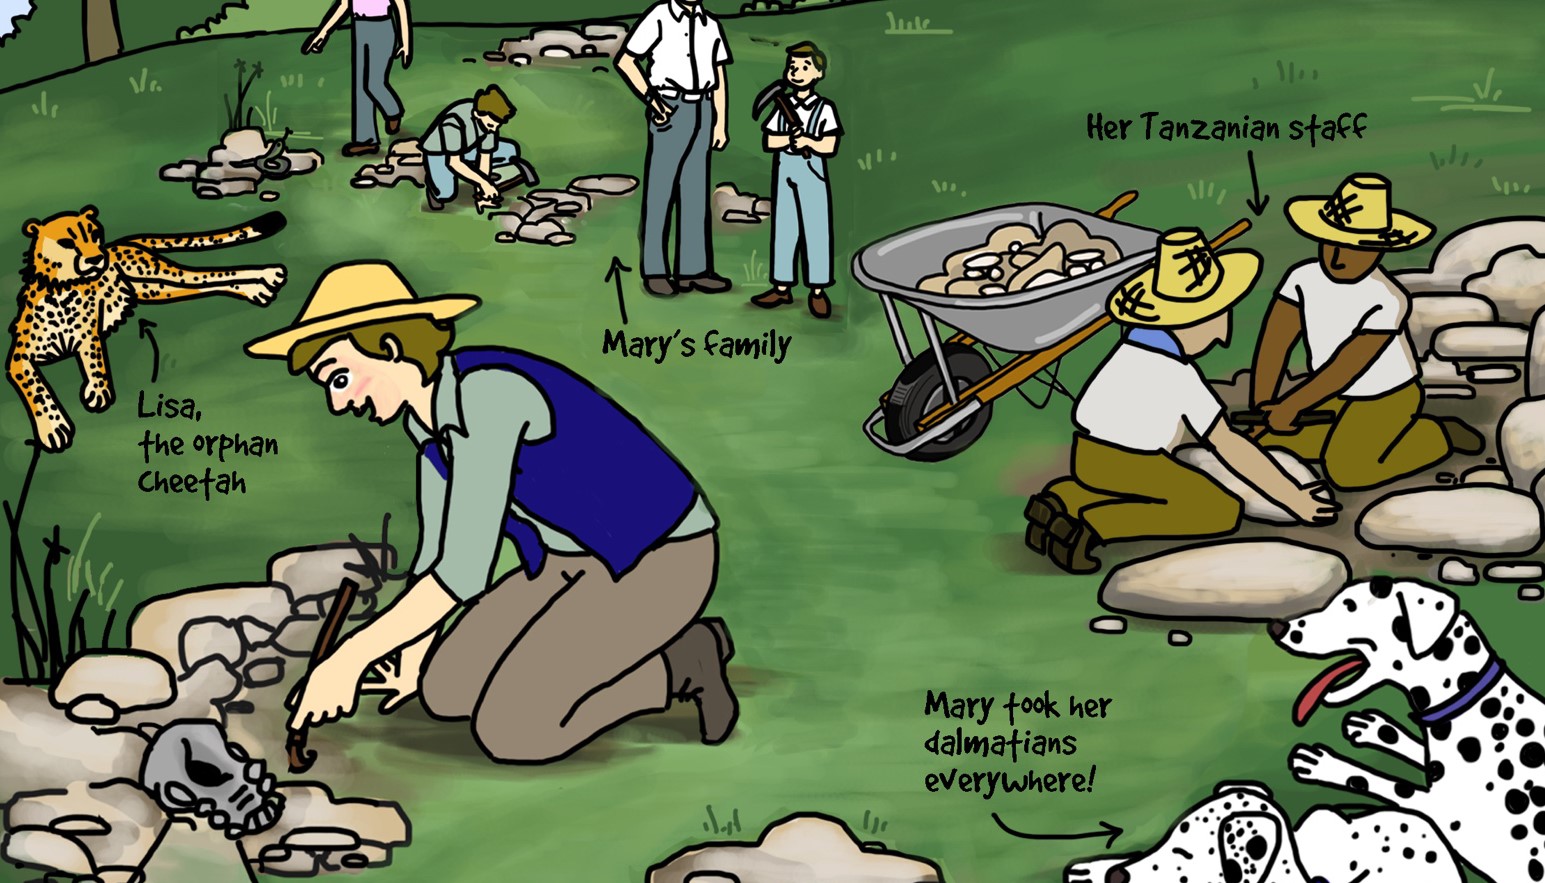 Illustration of paleontologist Mary Leakey unearthing a fossil during a dig in Tanzania alongside her loyal Dalmation dogs